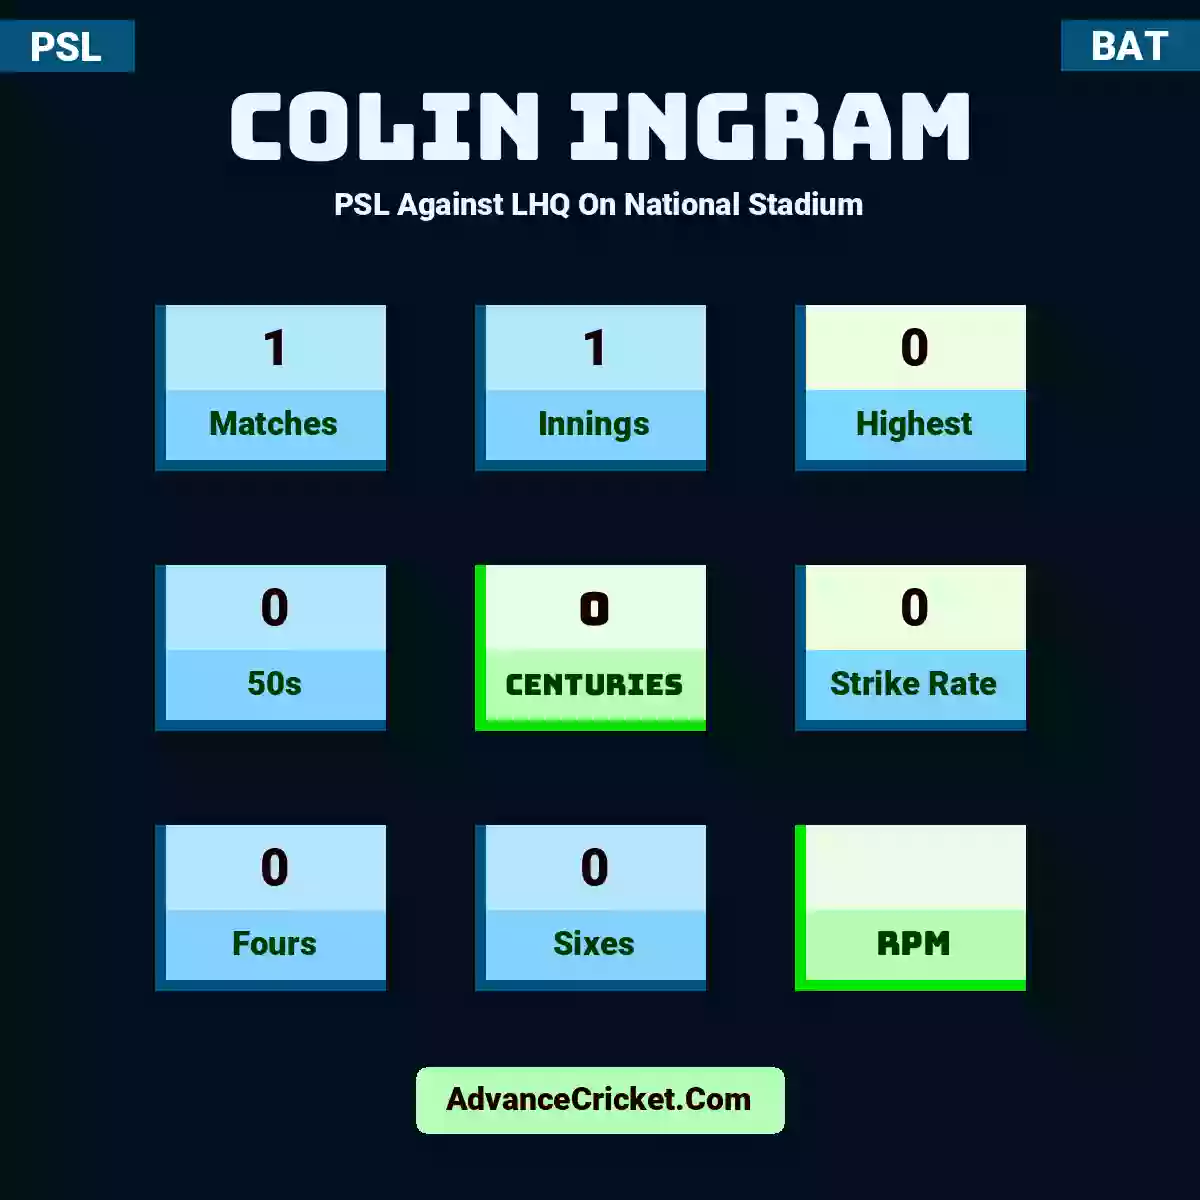 Colin Ingram PSL  Against LHQ On National Stadium, Colin Ingram played 1 matches, scored 0 runs as highest, 0 half-centuries, and 0 centuries, with a strike rate of 0. C.Ingram hit 0 fours and 0 sixes.